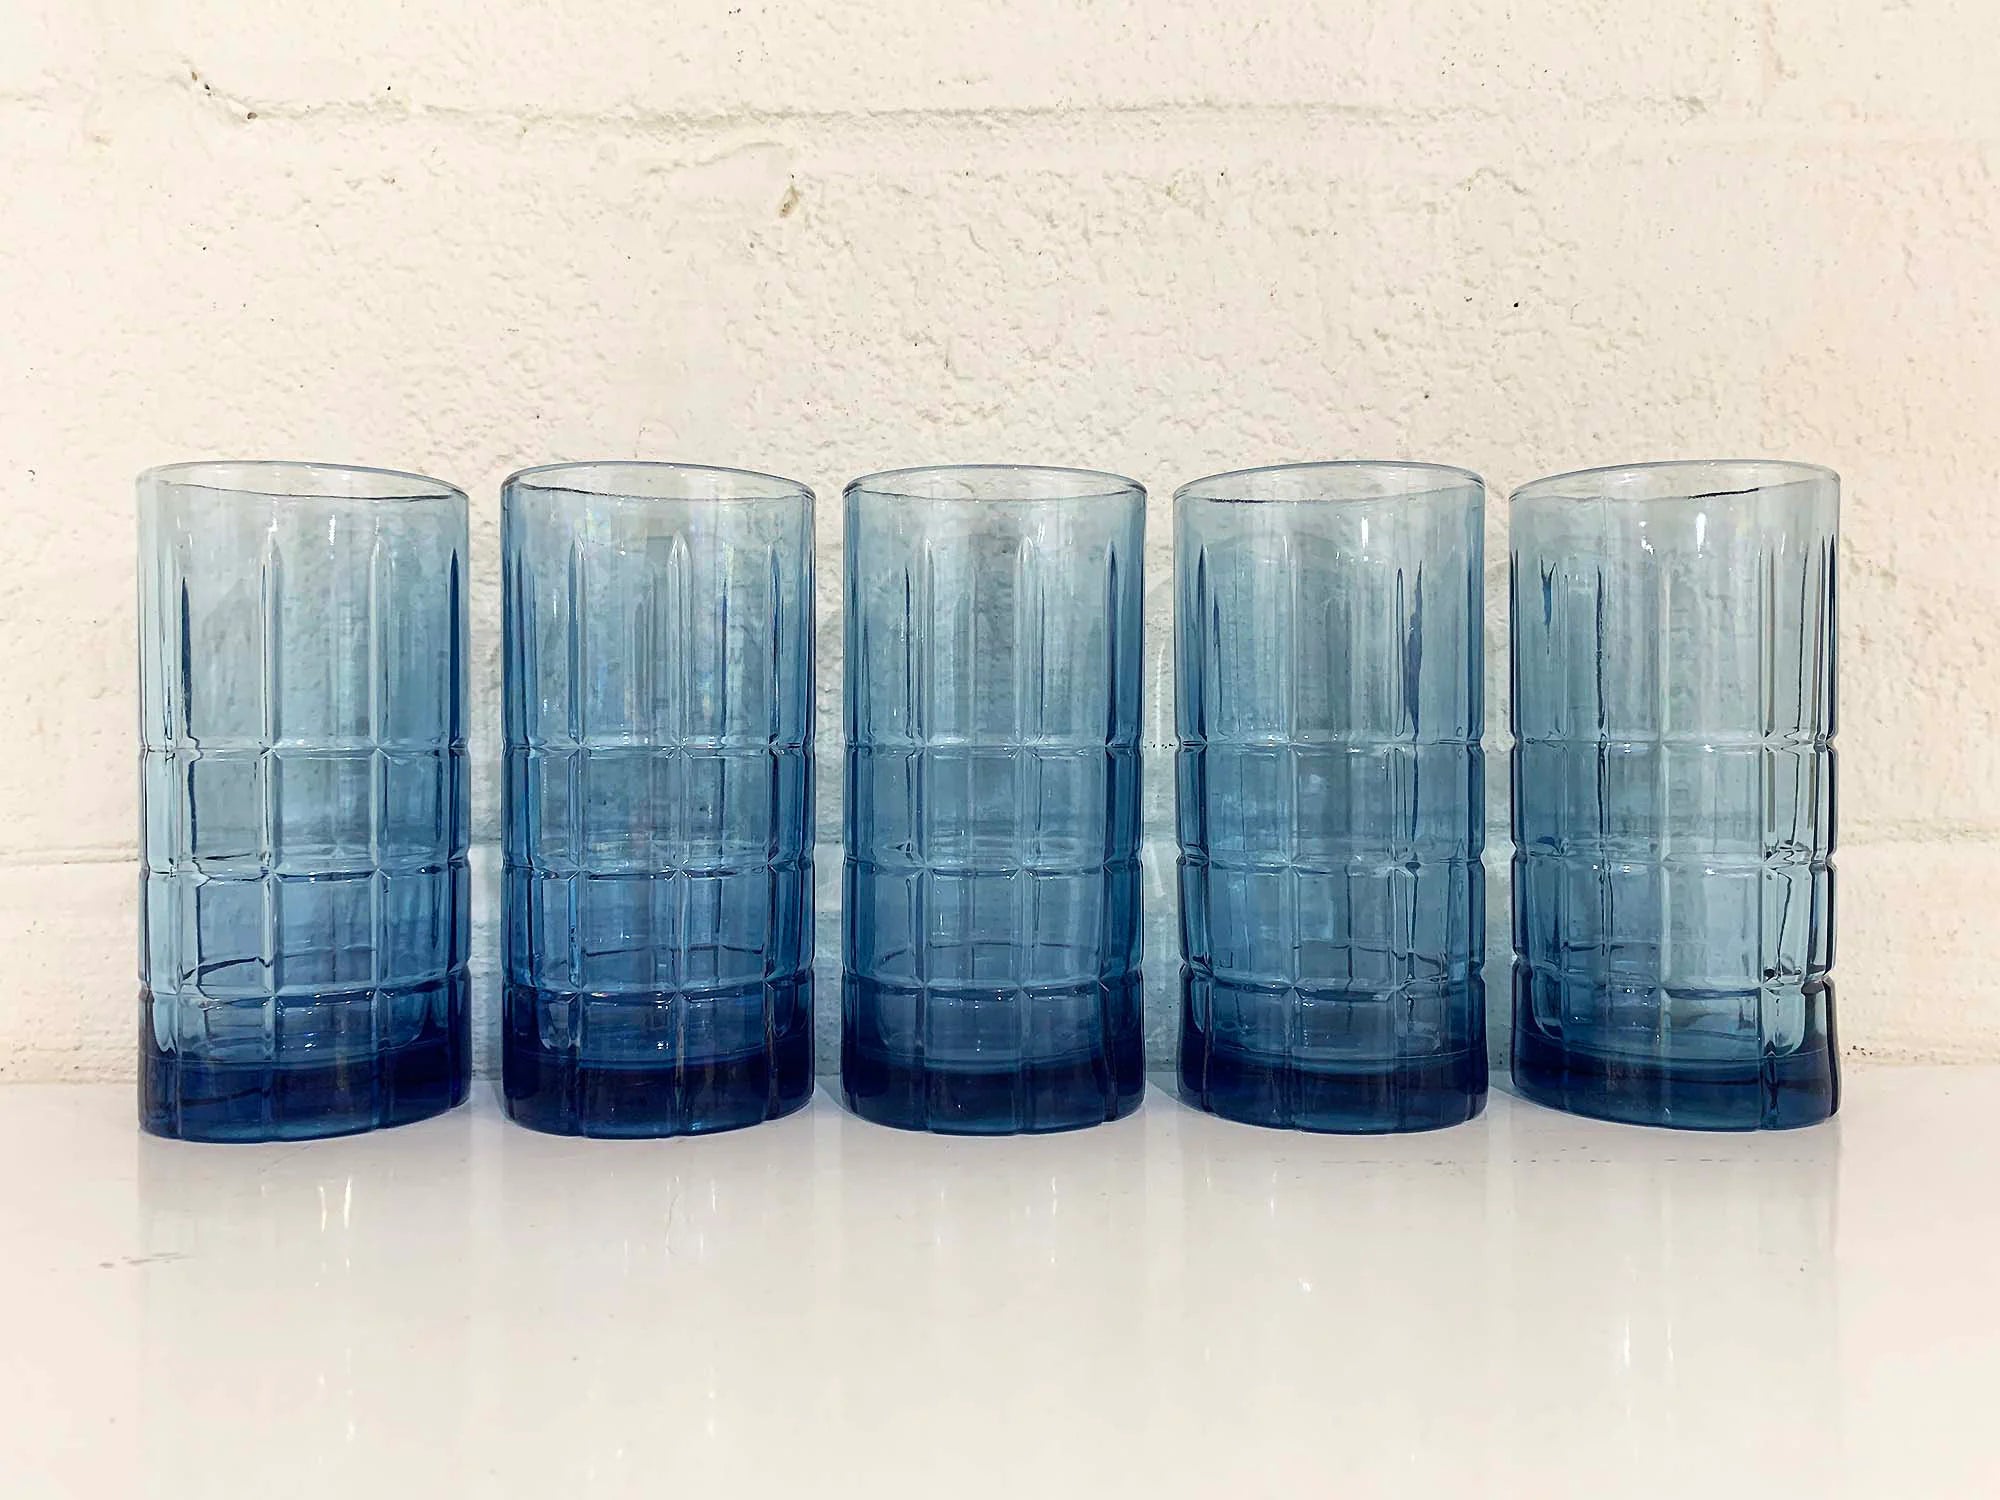 Vintage Glassware of Tall Tumbler Glasses. 1960s Anchor Hocking Blue a